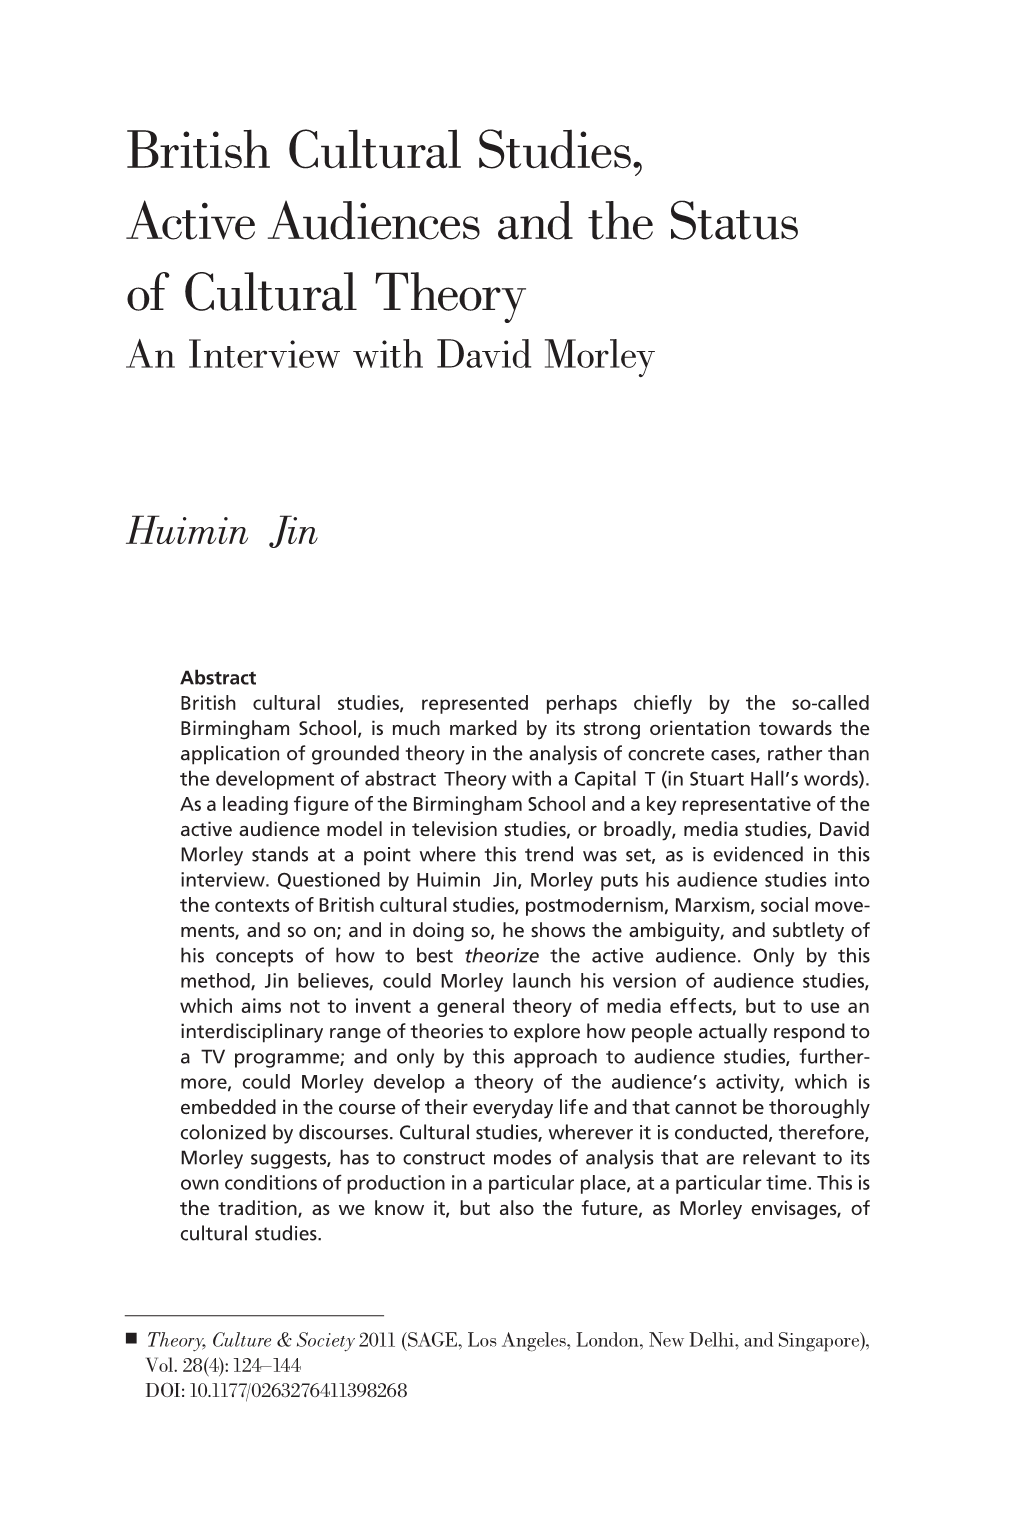 British Cultural Studies, Active Audiences and the Status of Cultural Theory an Interview with David Morley